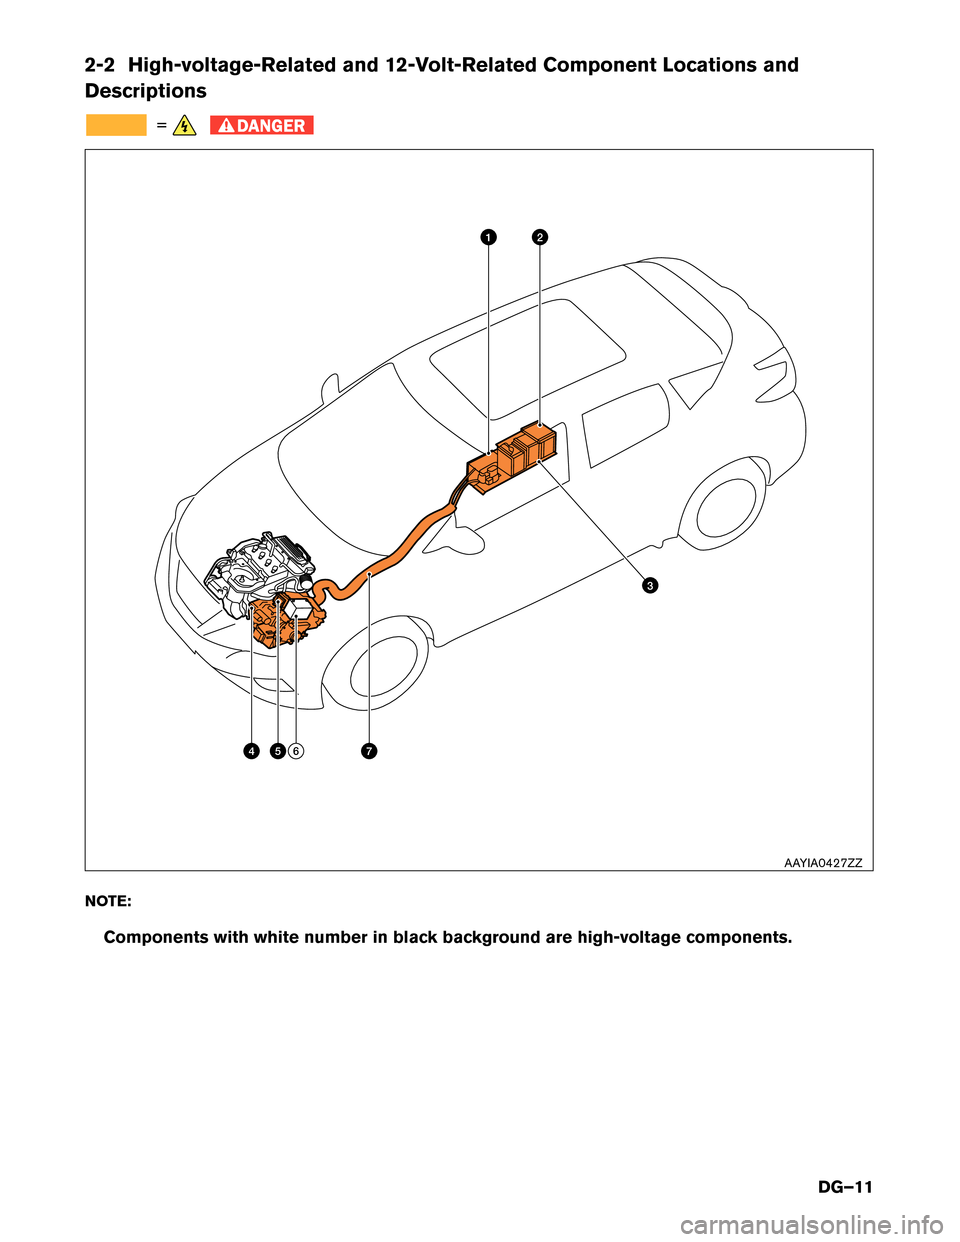 NISSAN MURANO HYBRID 2016 3.G Dismantling Guide 2-2 High-voltage-Related and 12-Volt-Related Component Locations and
Descriptions
=
DANGER
NOTE:
Components with white number in black background are high-voltage components. 5 74 6 2
31
AAYIA0427ZZ
D